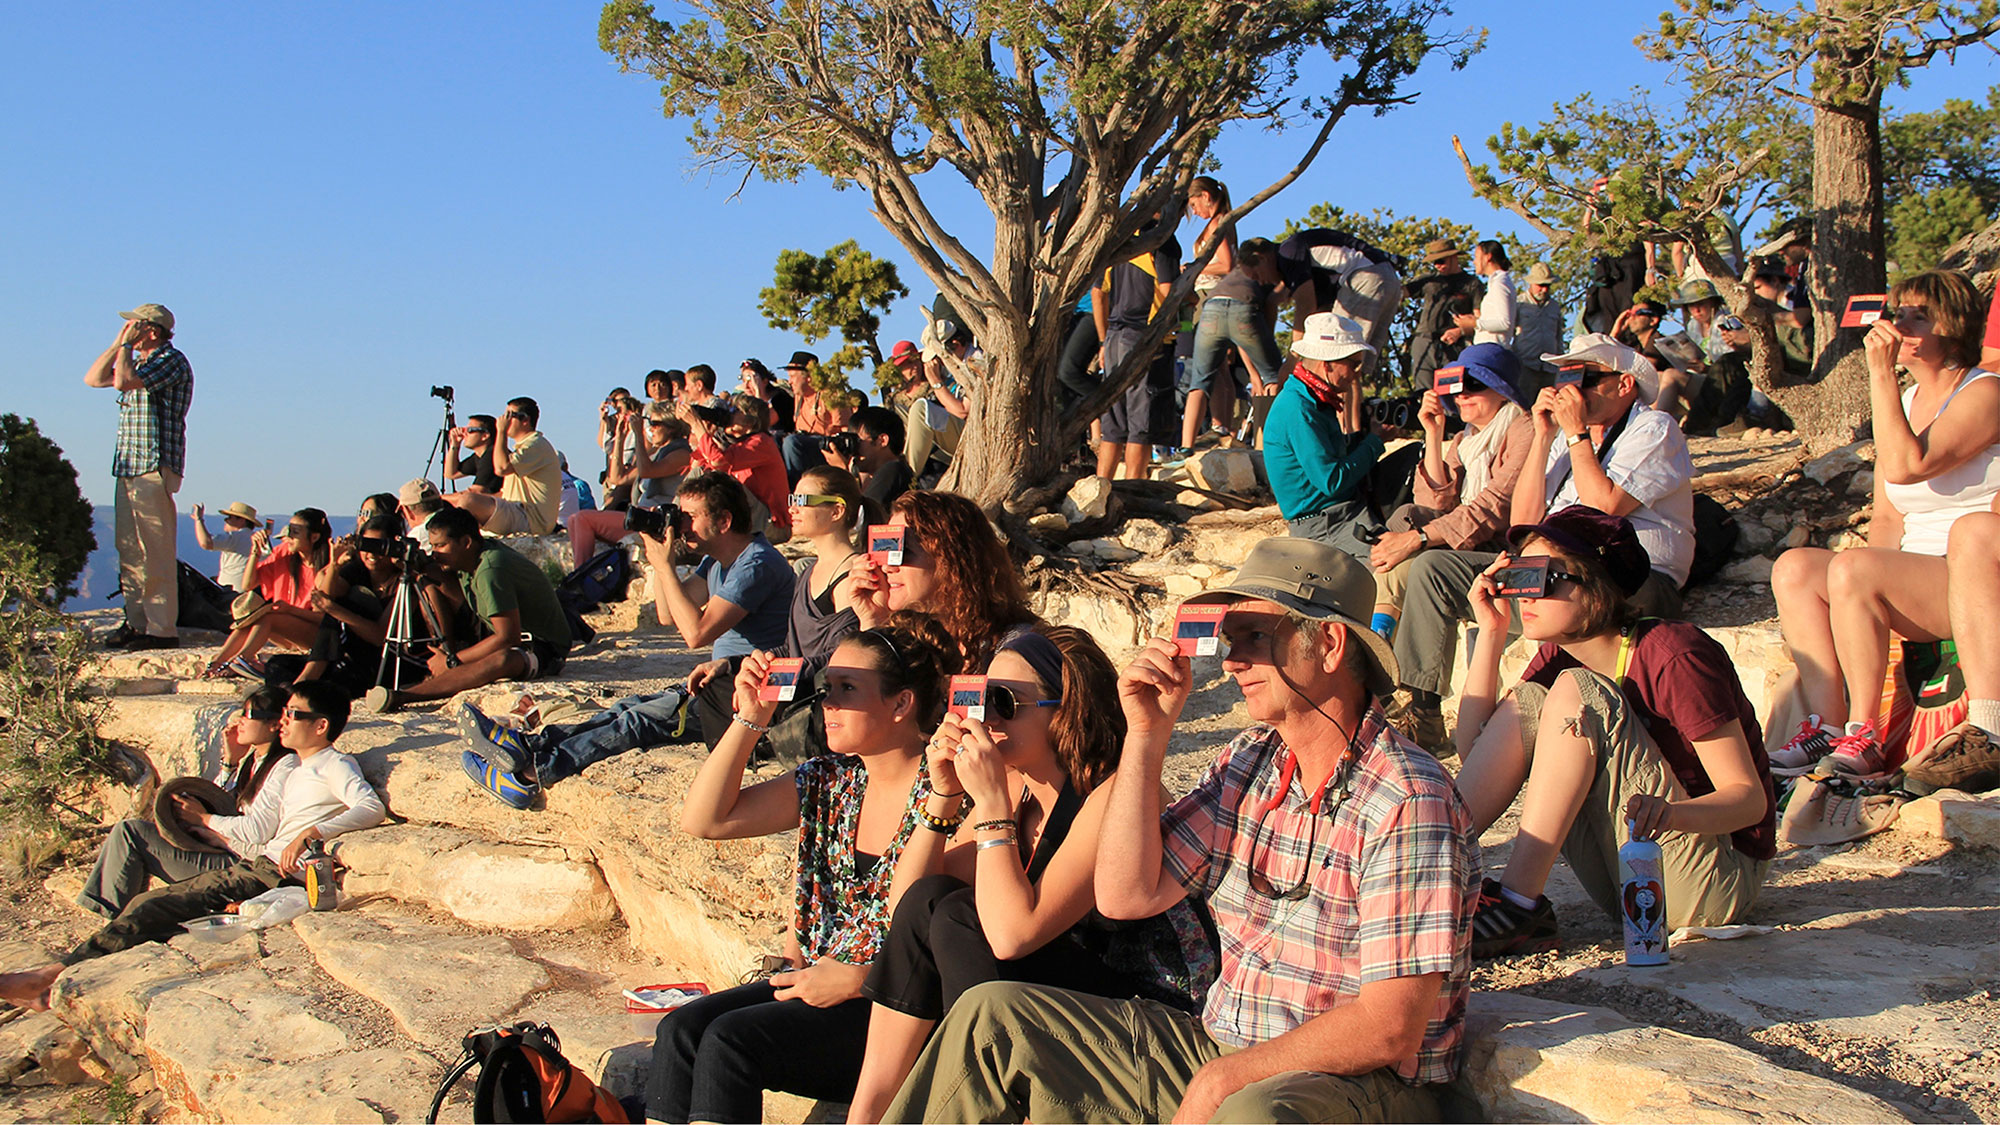 A crowd of people sitting on a rocky slope with a few trees, all looking in the same direction and wearing either solar viewing glasses or holding up handheld solar viewers.